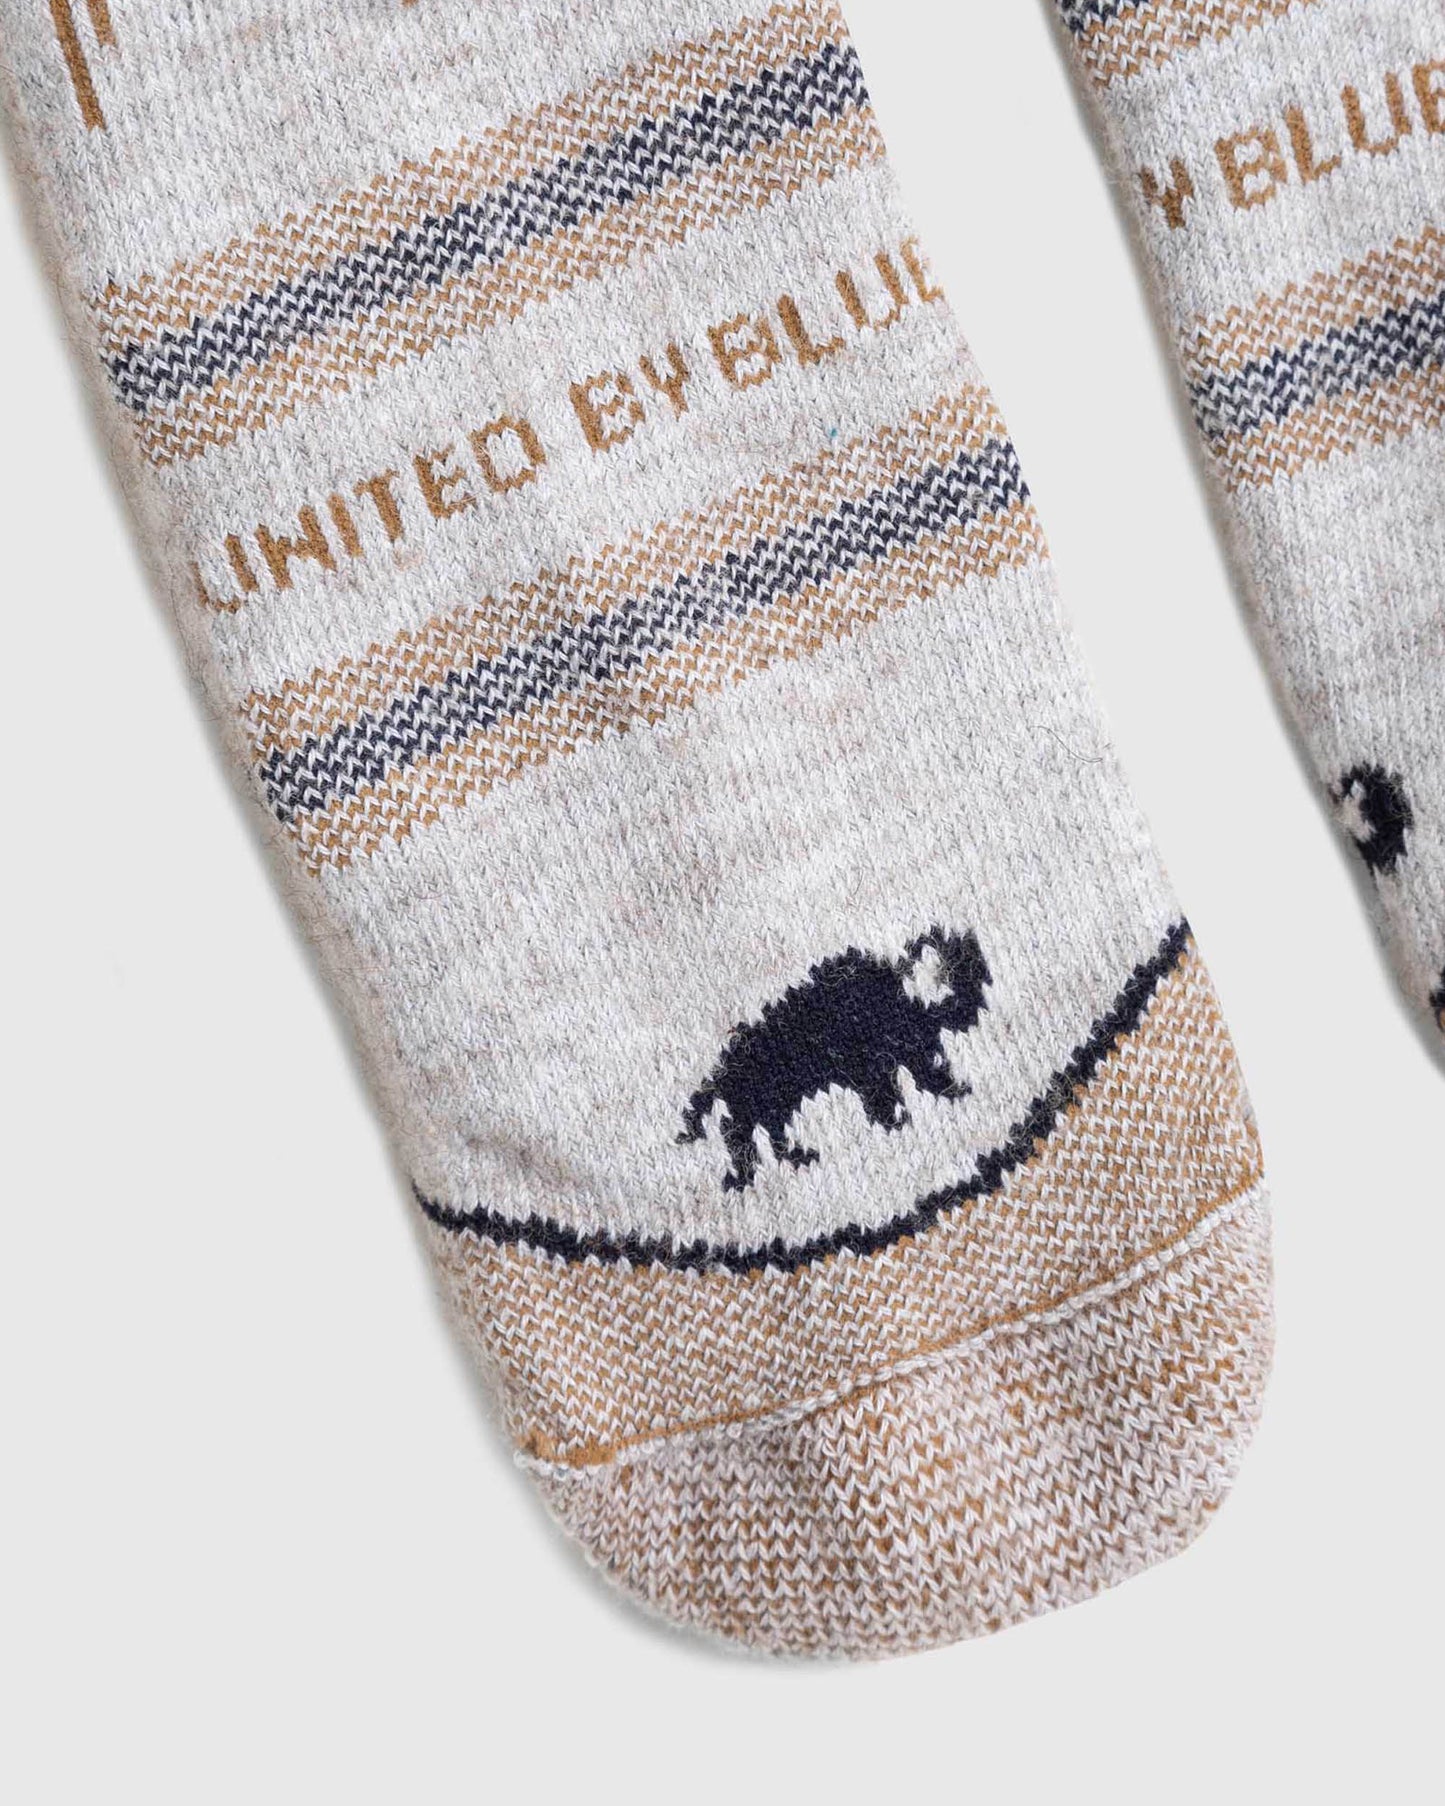 The Imperfect Bison Trail Sock